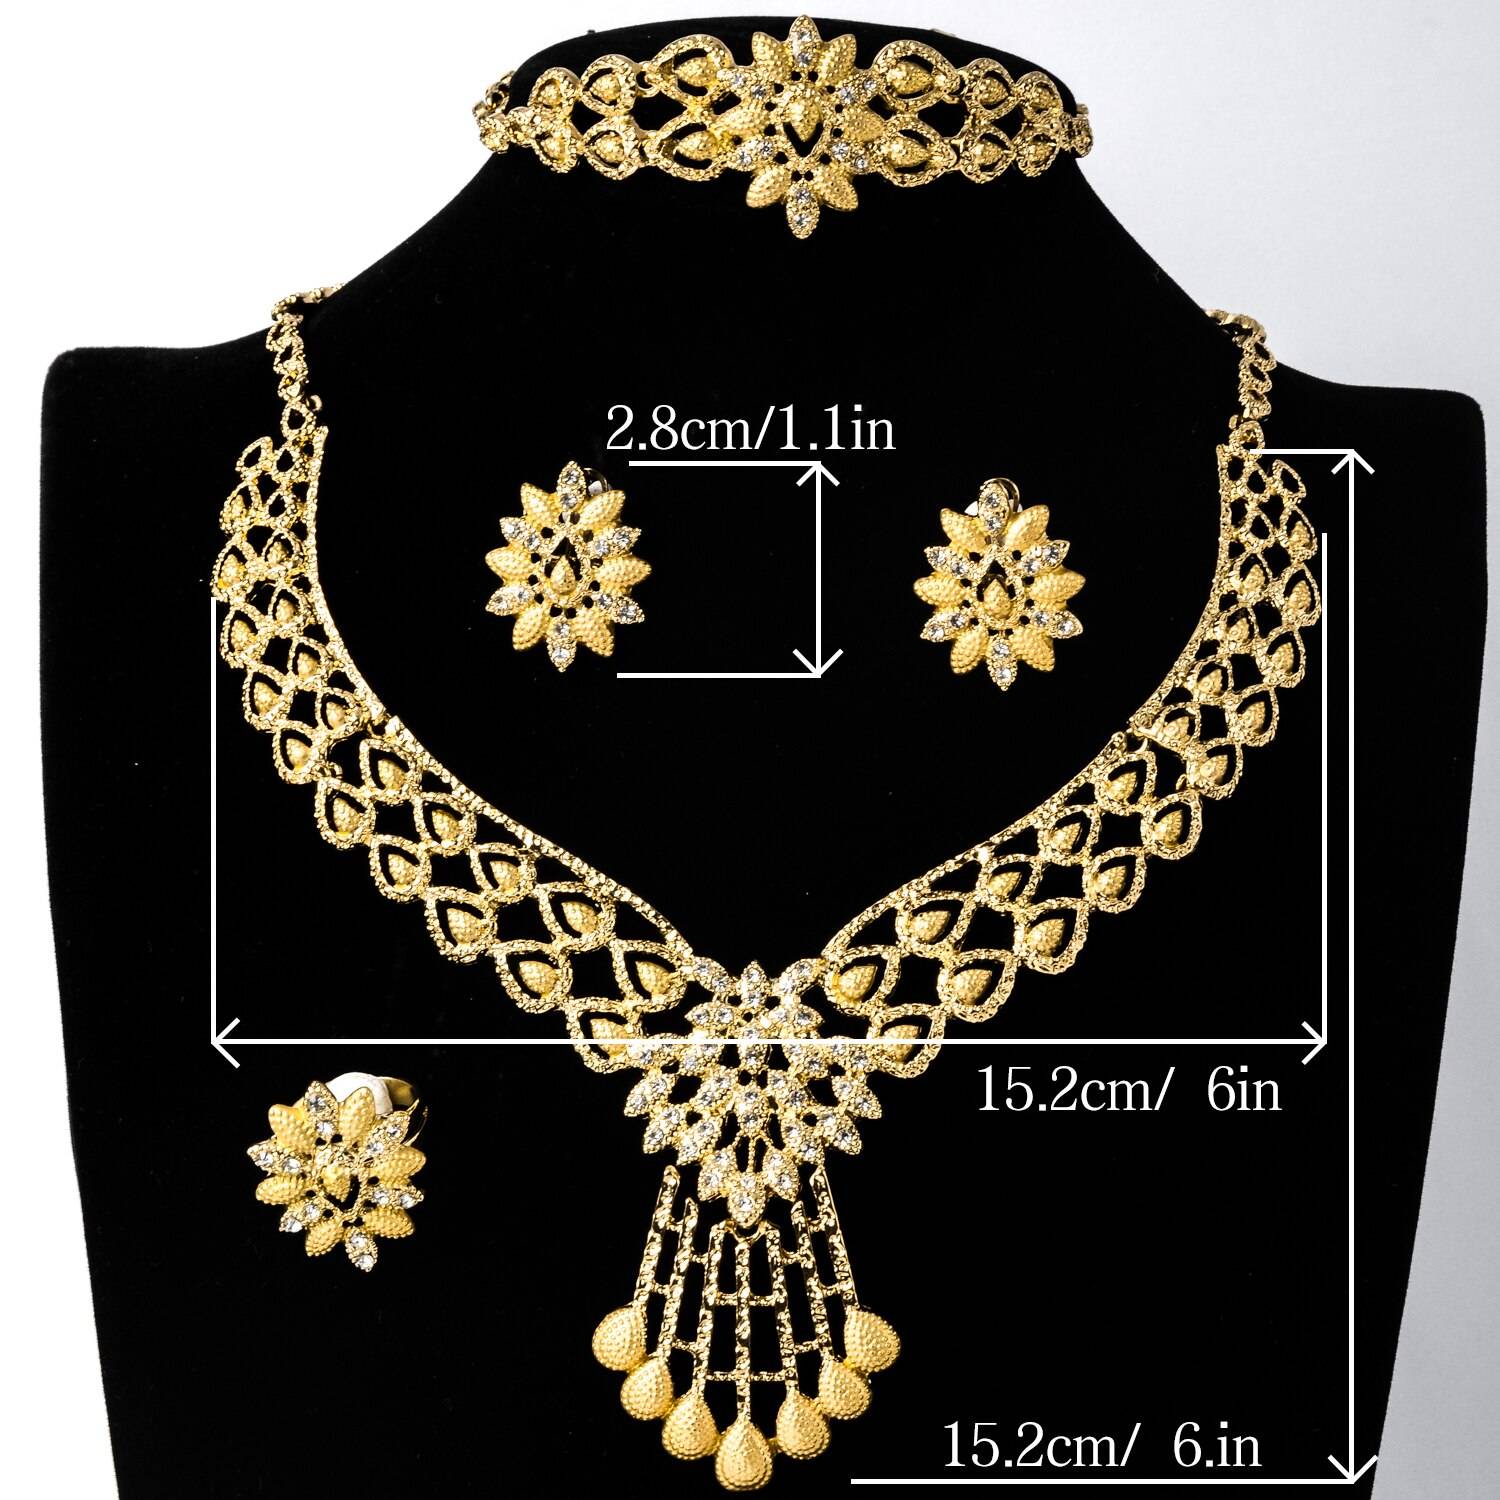 Sunny Jewelry African Dubai New Hot Sale Gold Planted Bridal Wedding Set Earrings Necklace Bangle Ring For Women Classic Party Wedding Jewellery Set 8d255f28538fbae46aeae7: Jewelry Sets